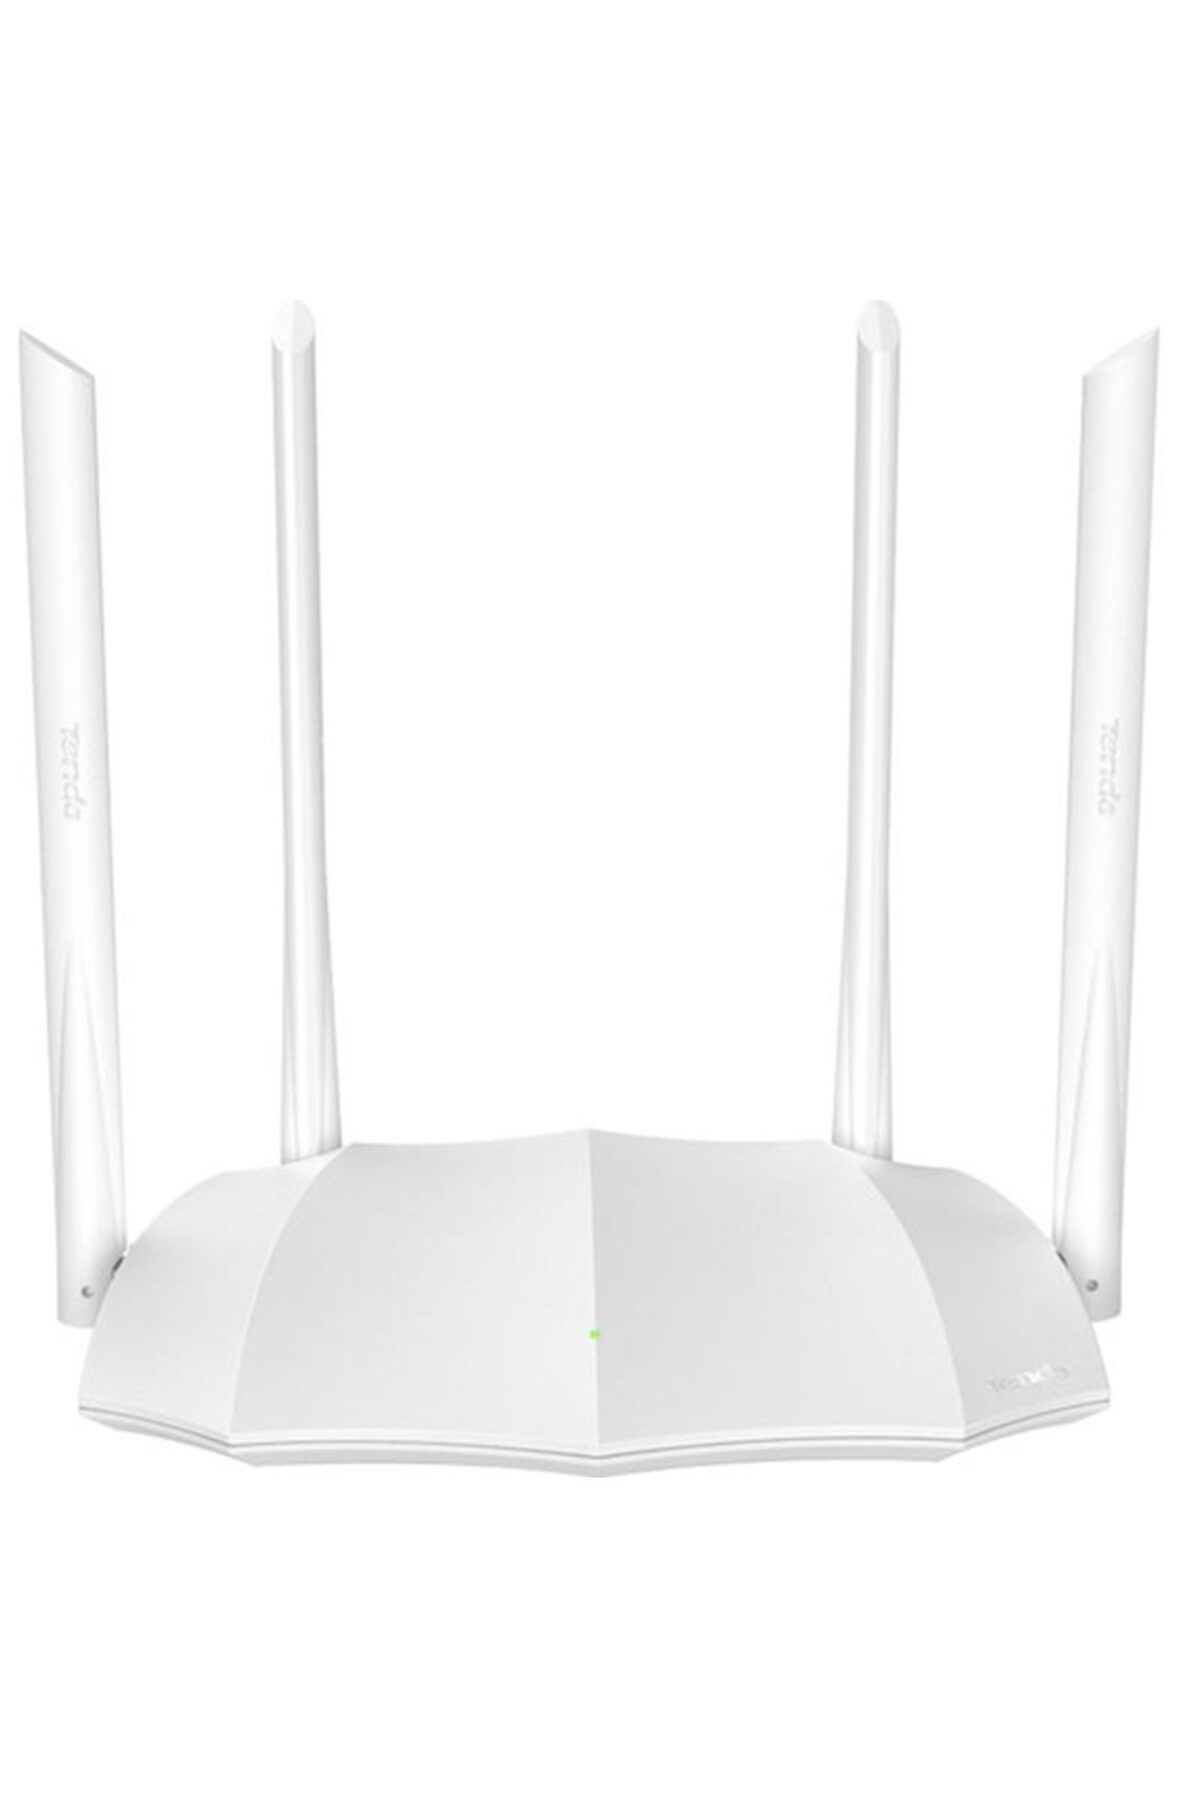 Hatiç Store TENDA AC5 1200 MBPS DUAL-BAND 4 PORT WIFI ROUTER+ACCESS POINT (81)